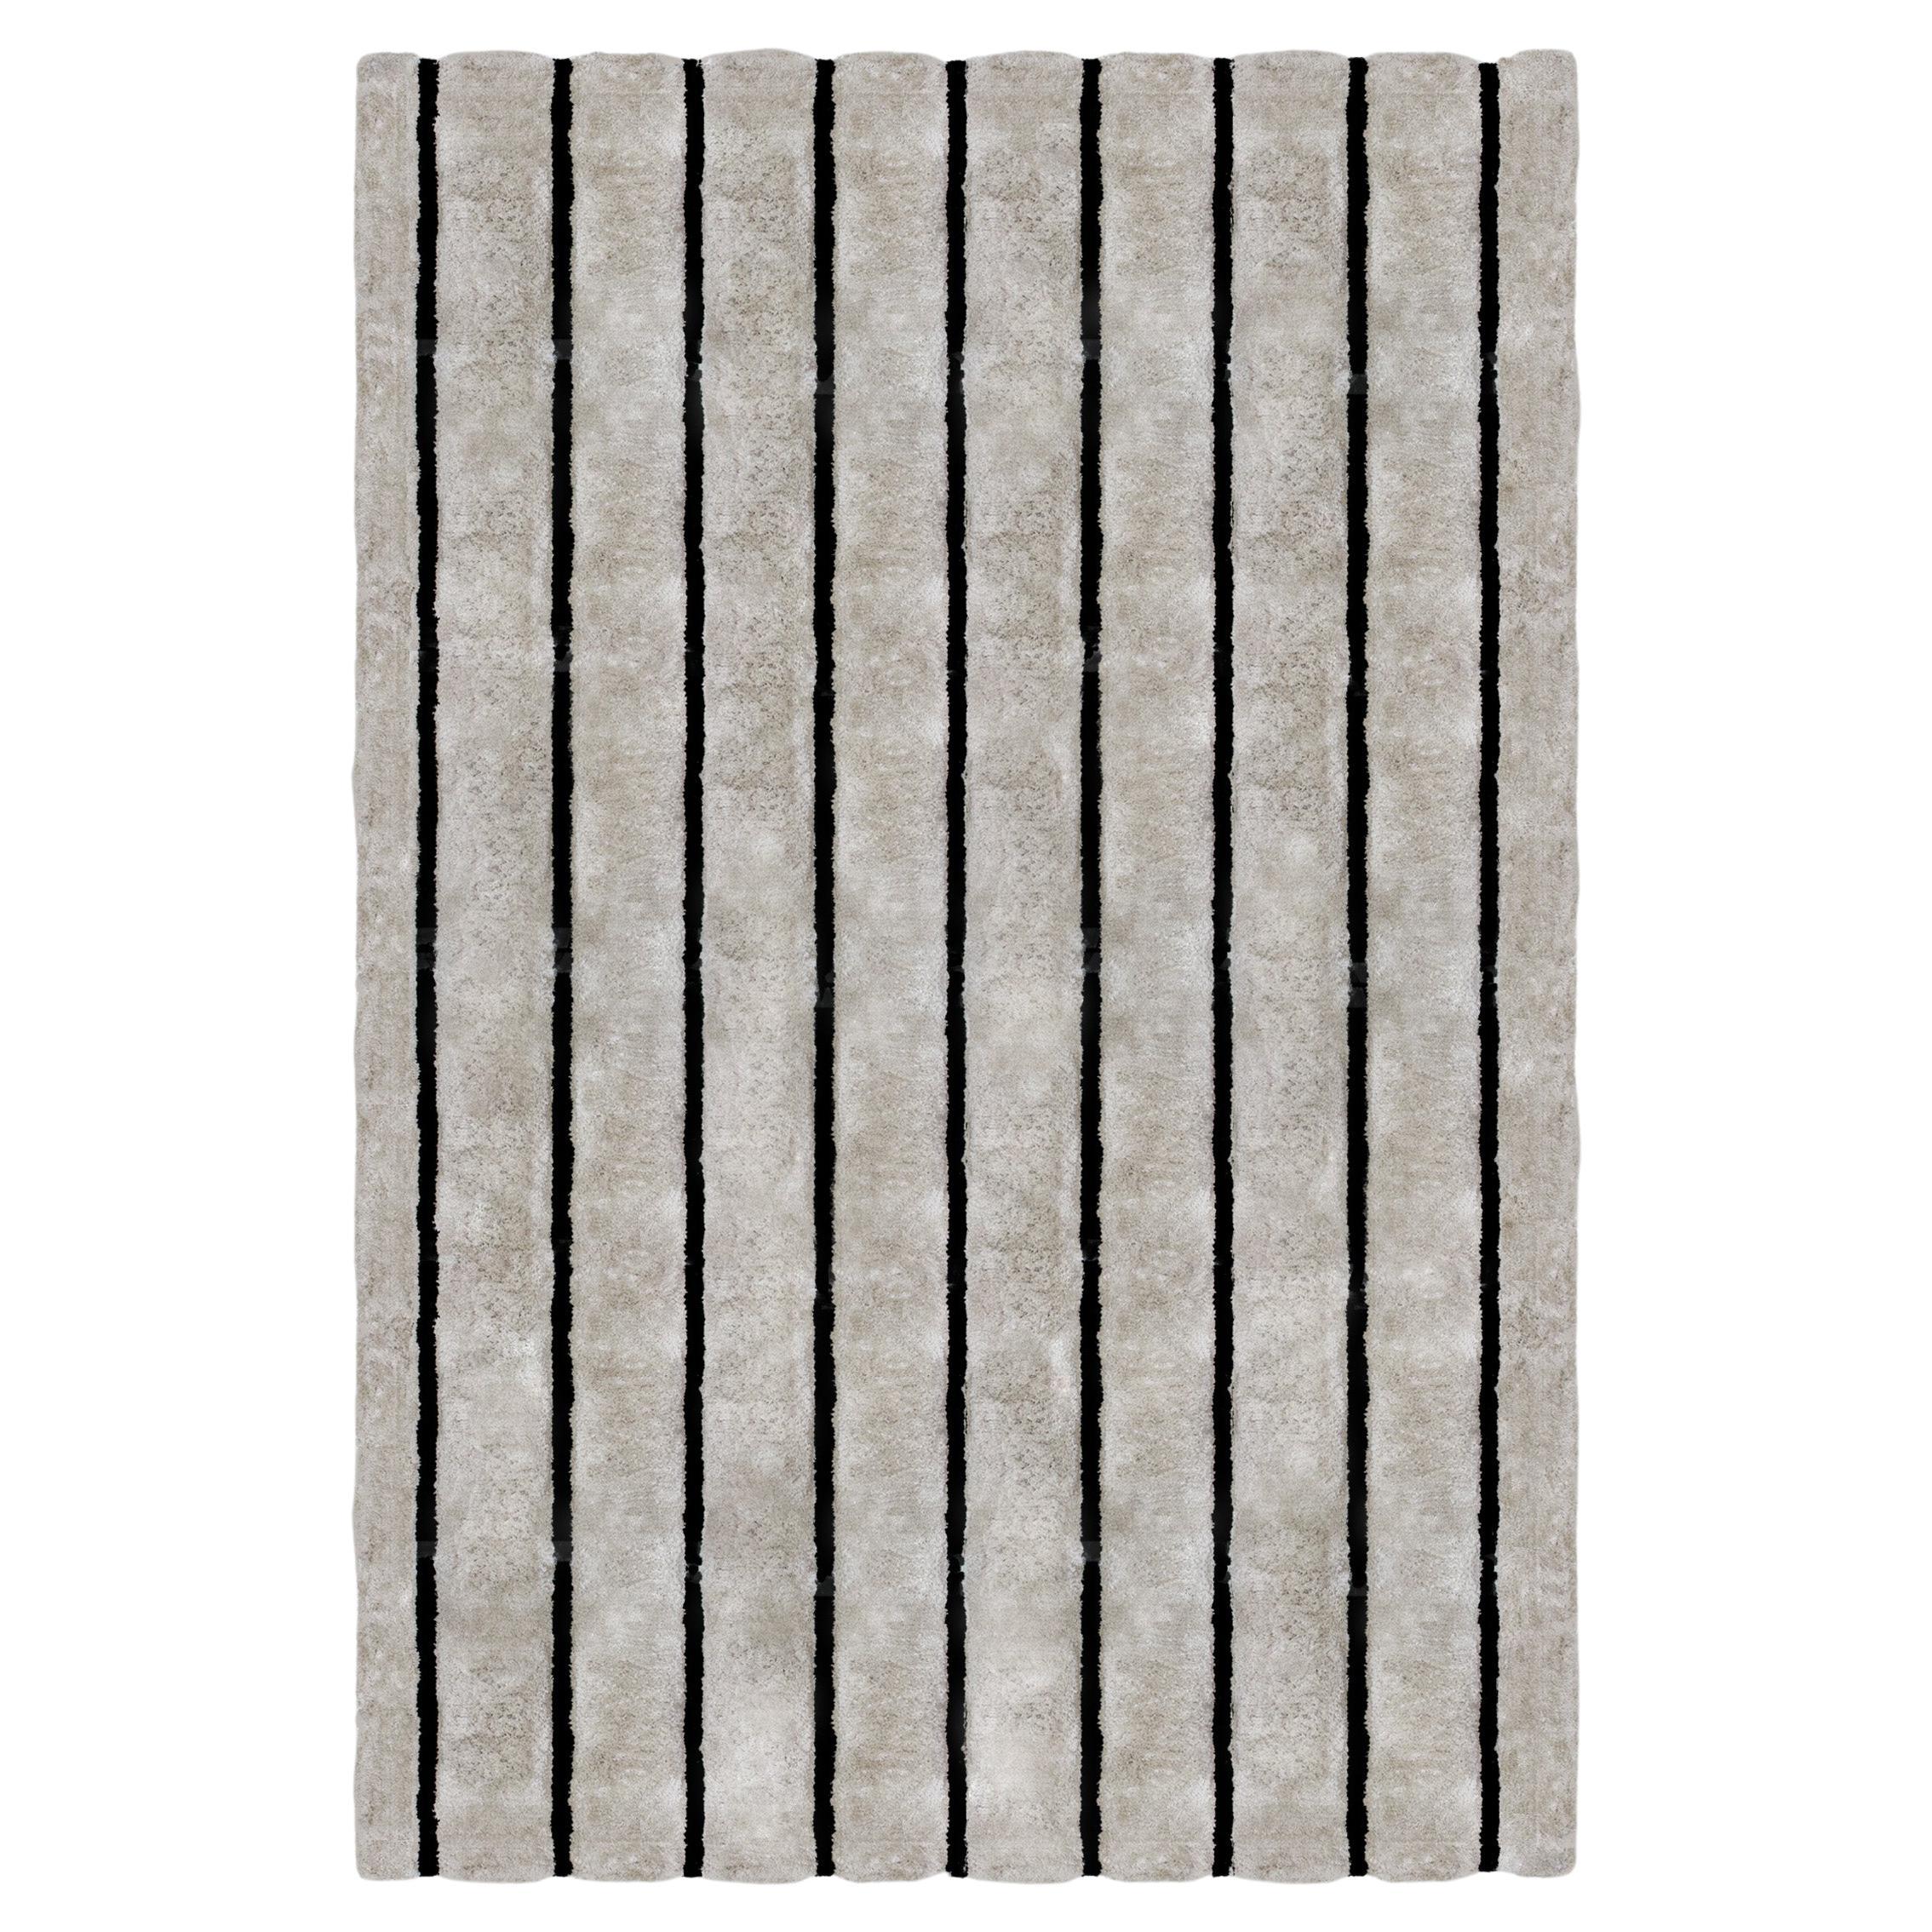 Ever Hand-Tufted Cream Rug, Take Me Up Collection by Paolo Stella